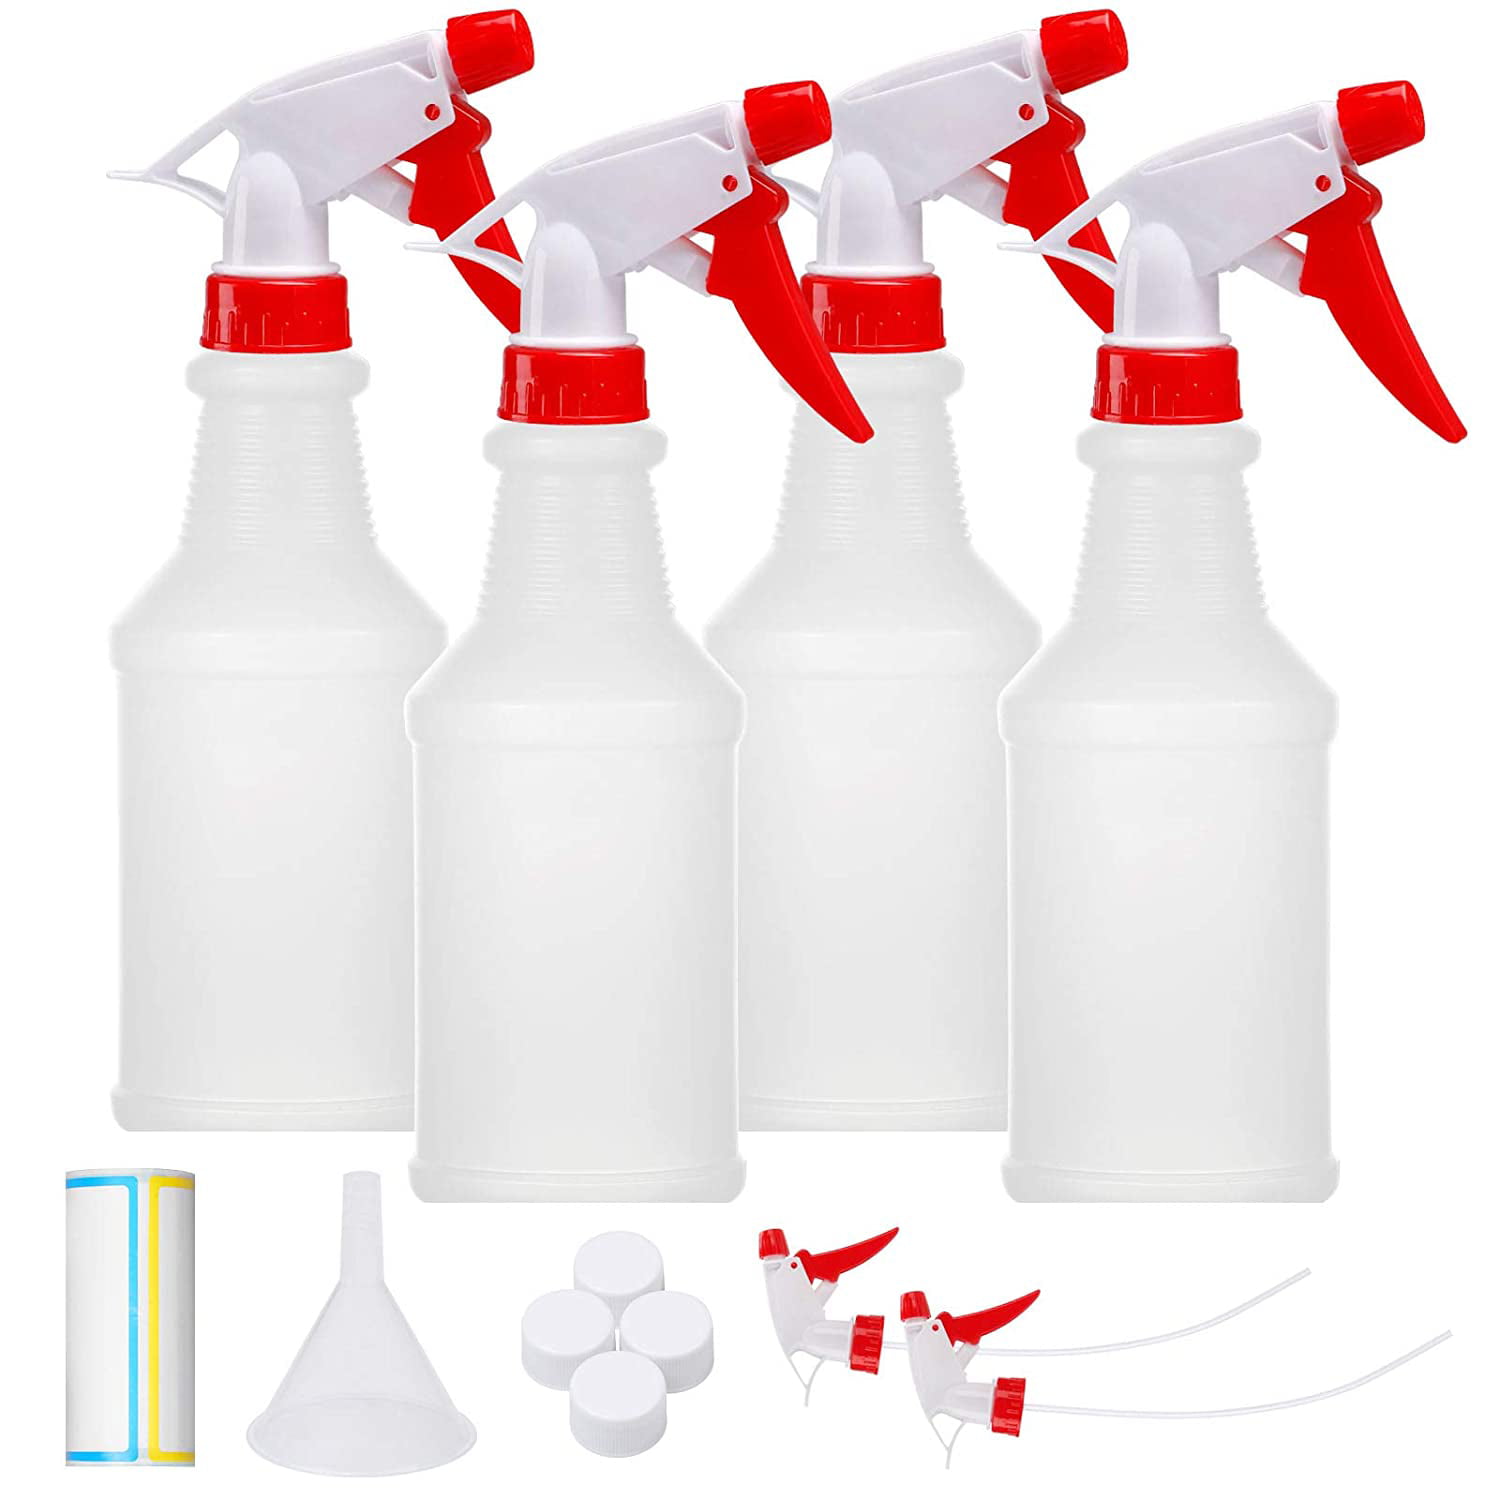 Plastic Spray Bottles Leak Proof Cleaning Solution With Funnel 4 pack 16 oz 